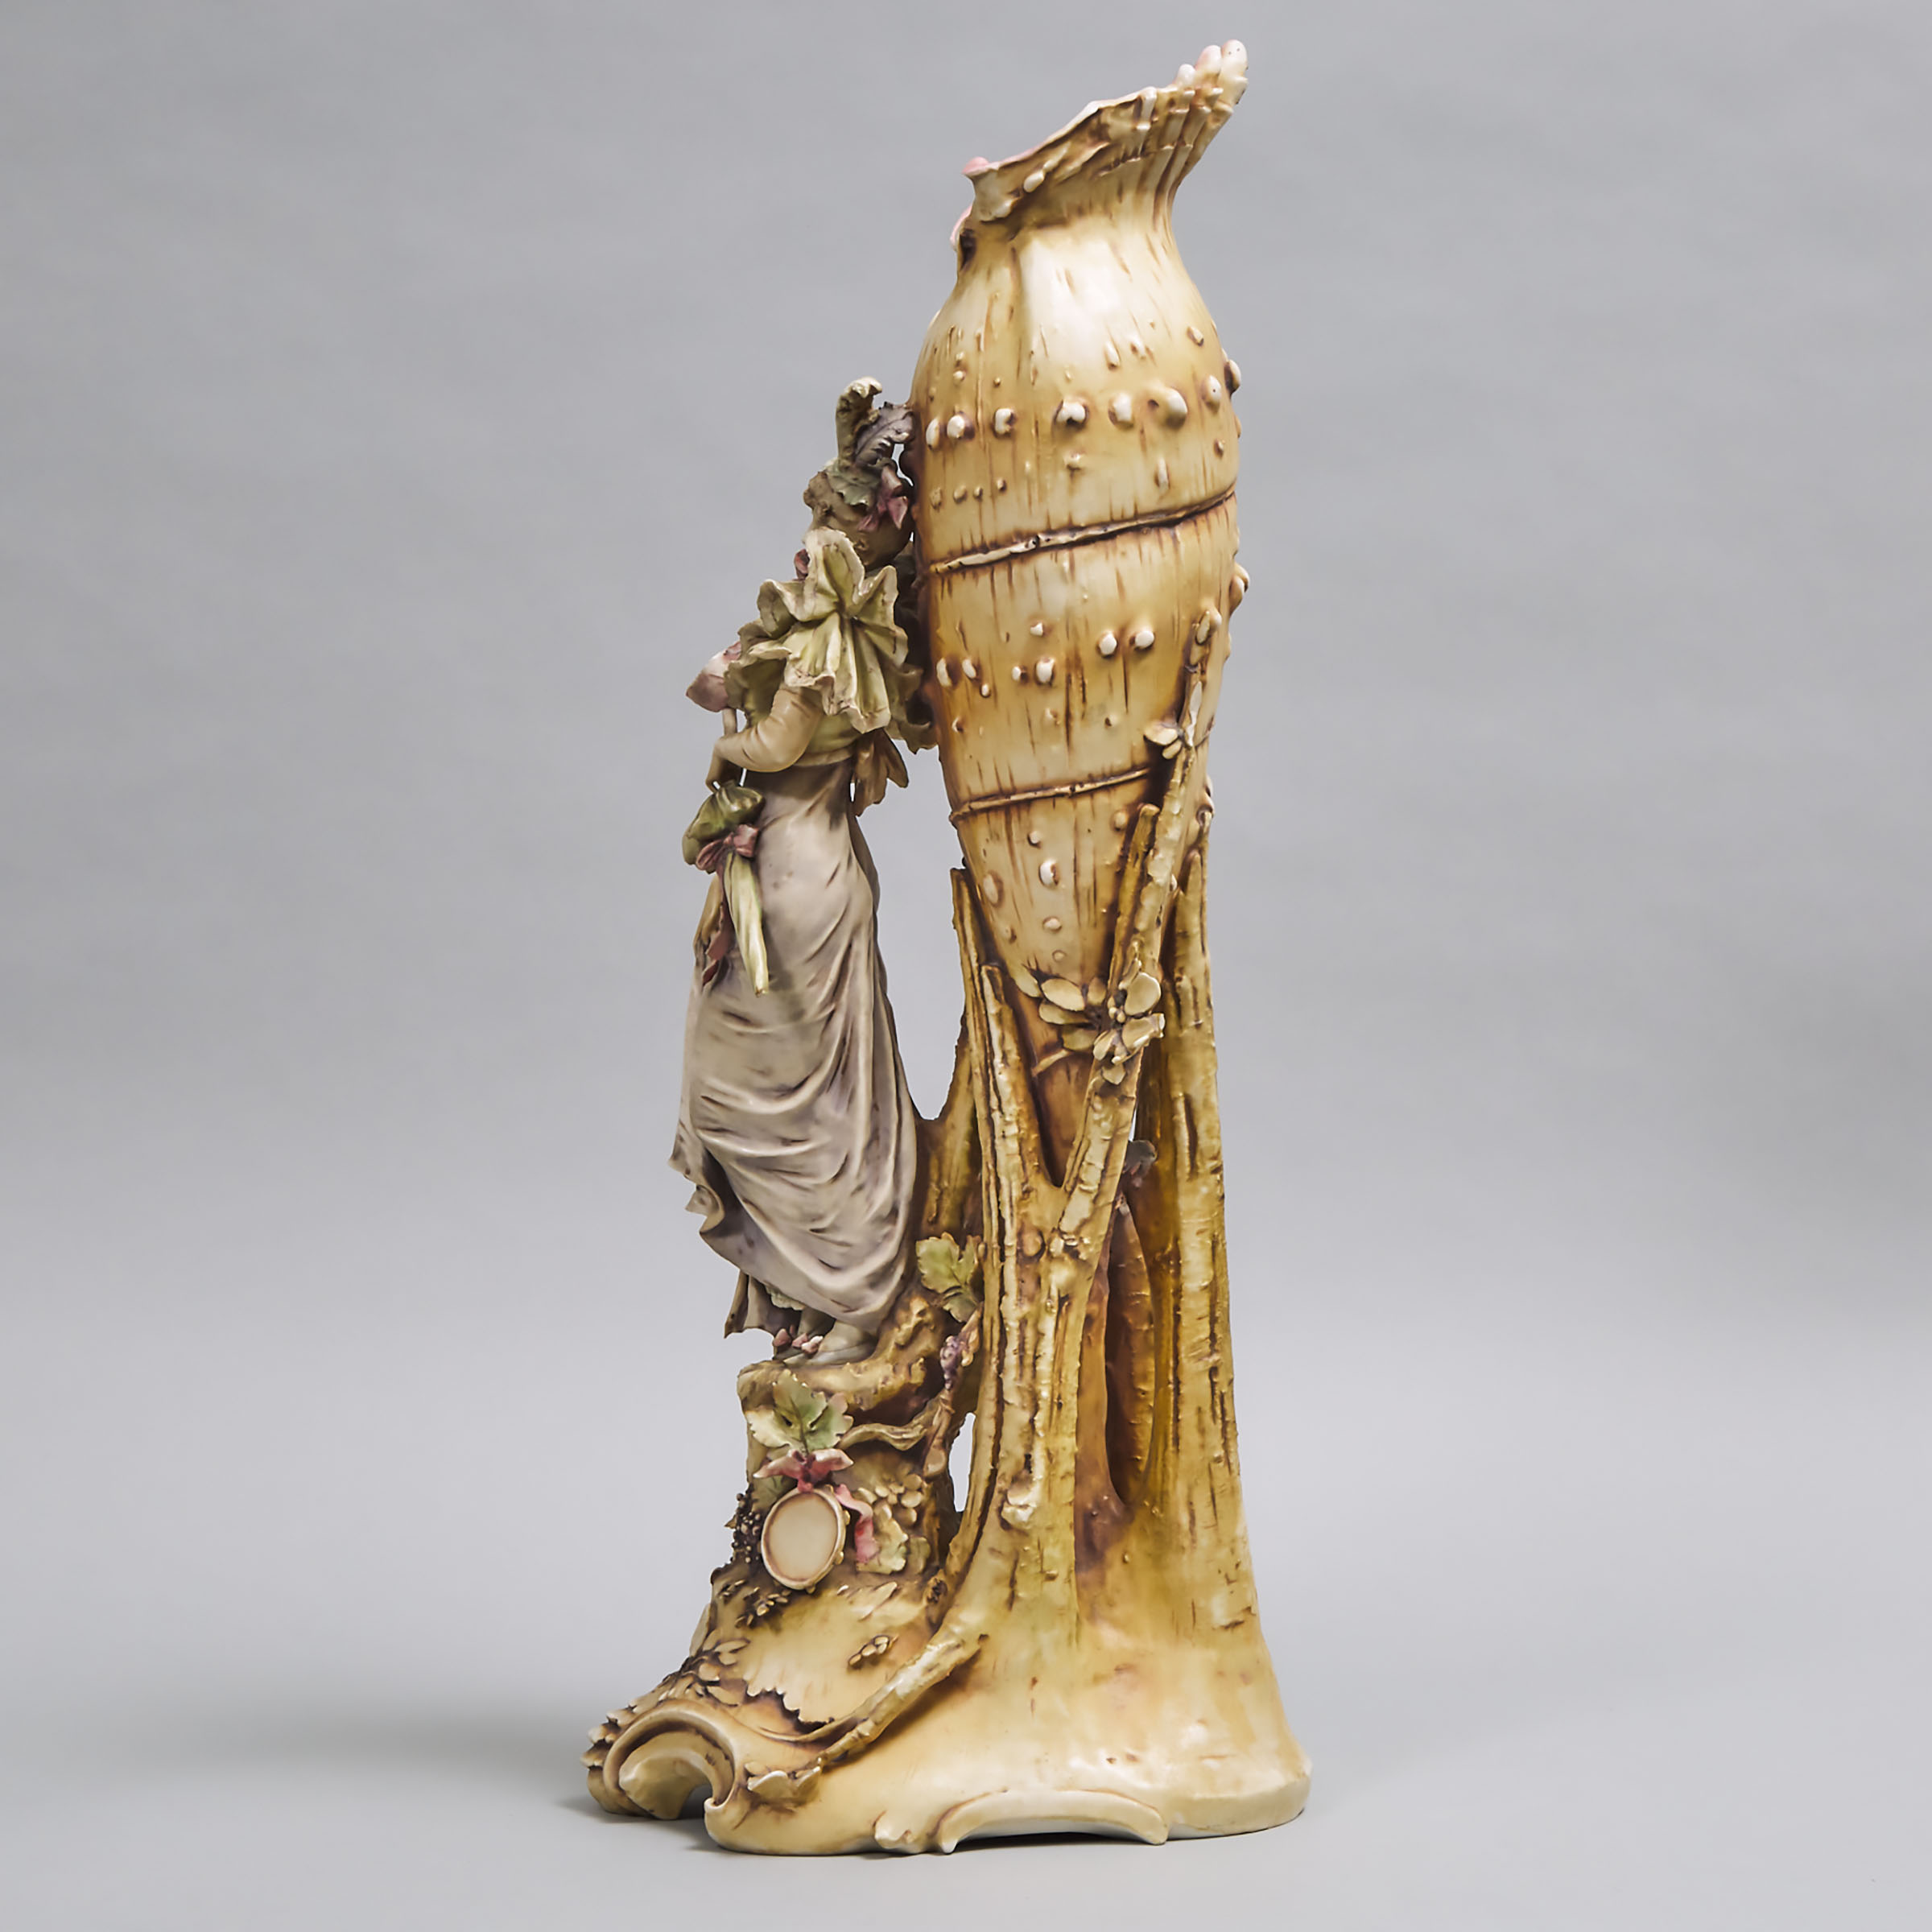 Riessner, Stellmacher & Kessel 'Amphora' Large Vase Group of a Lady with Parasol by a Shell, early 20th century